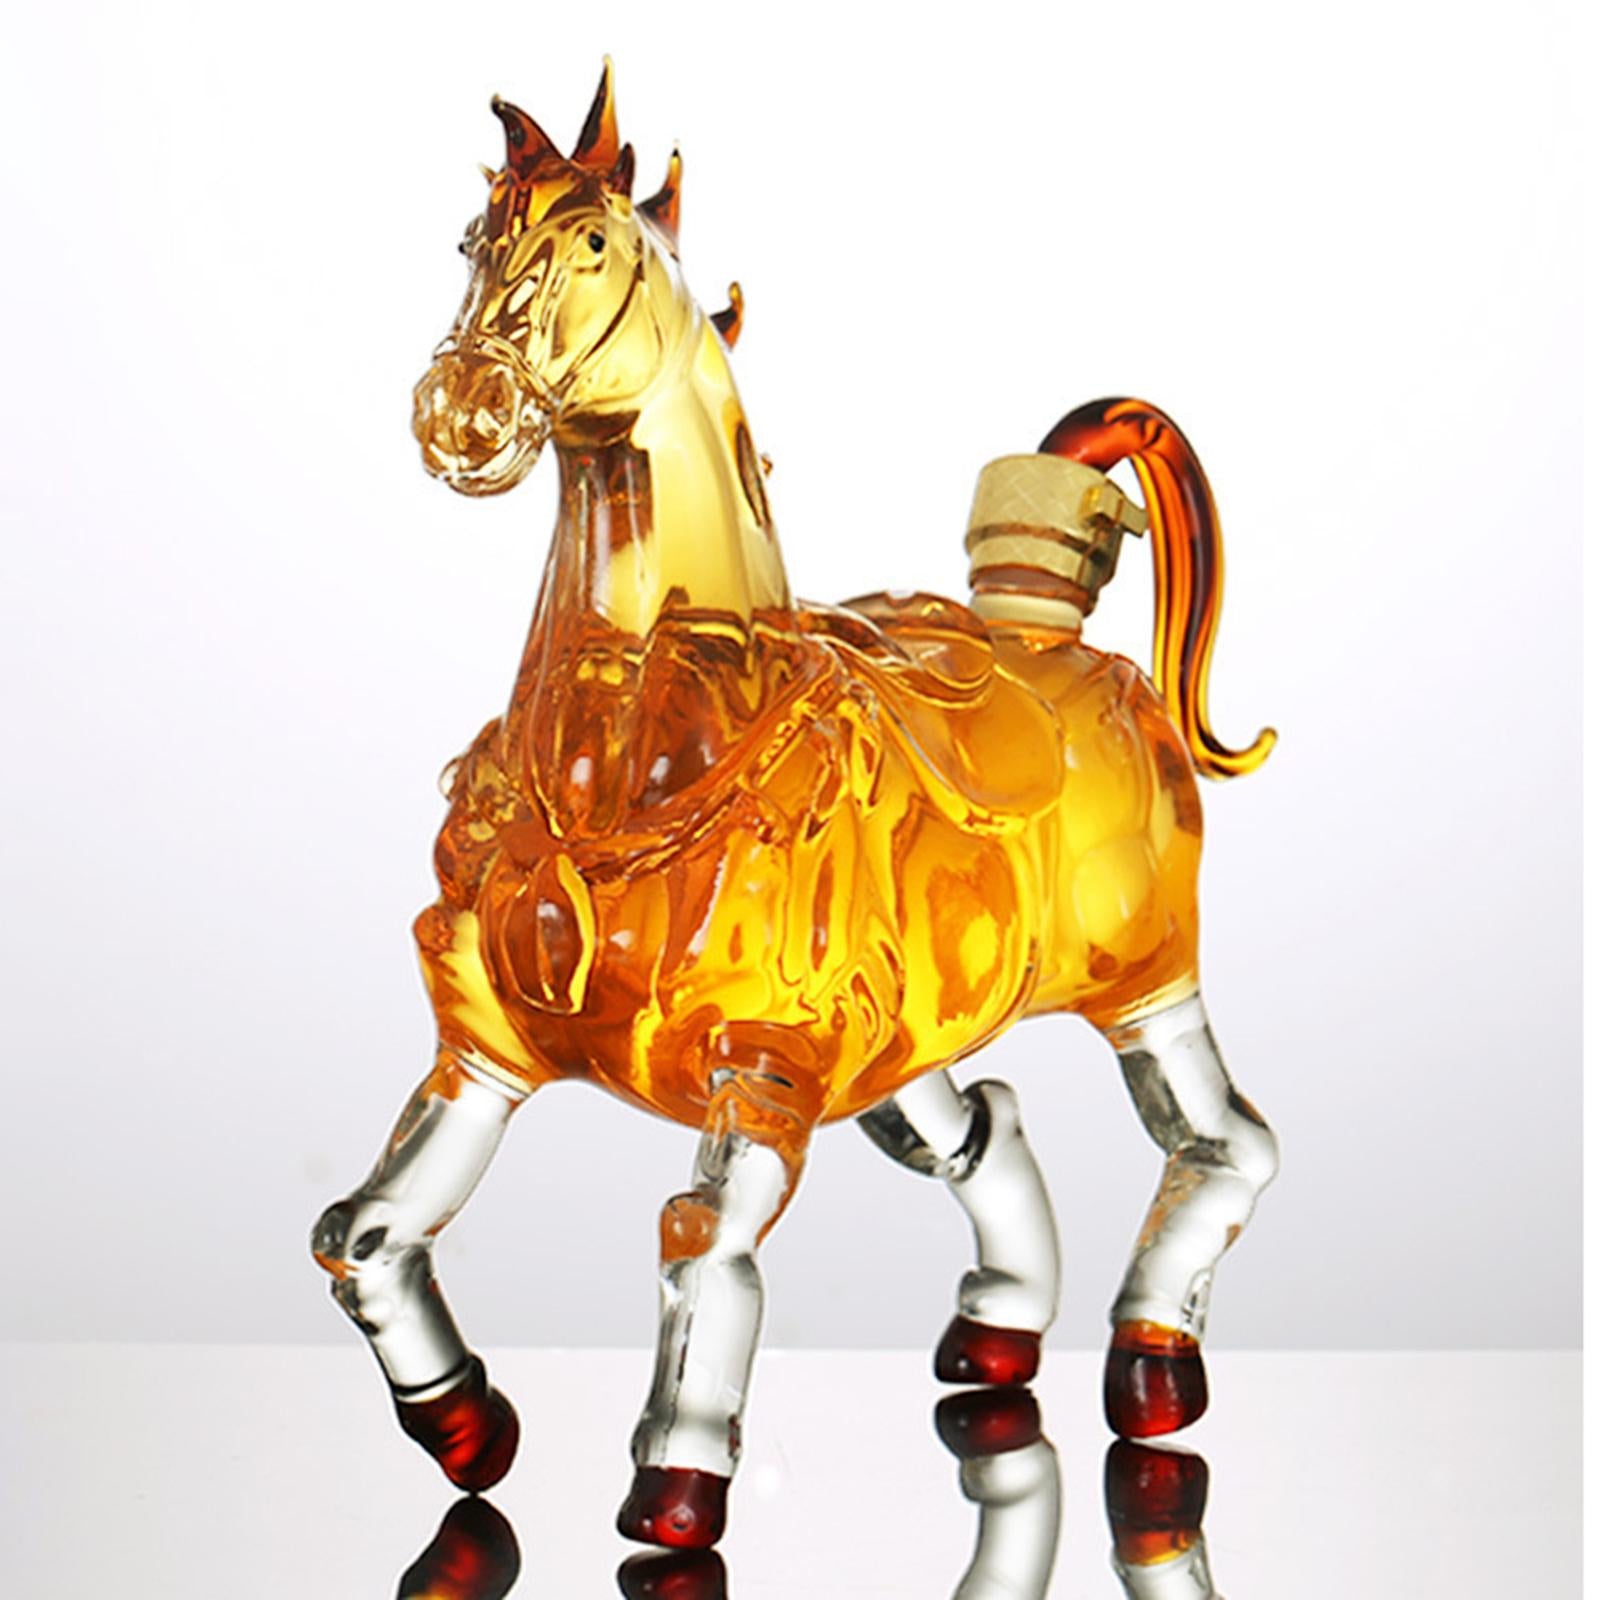 Sip with strength and grace: The animal-shaped whiskey vessel